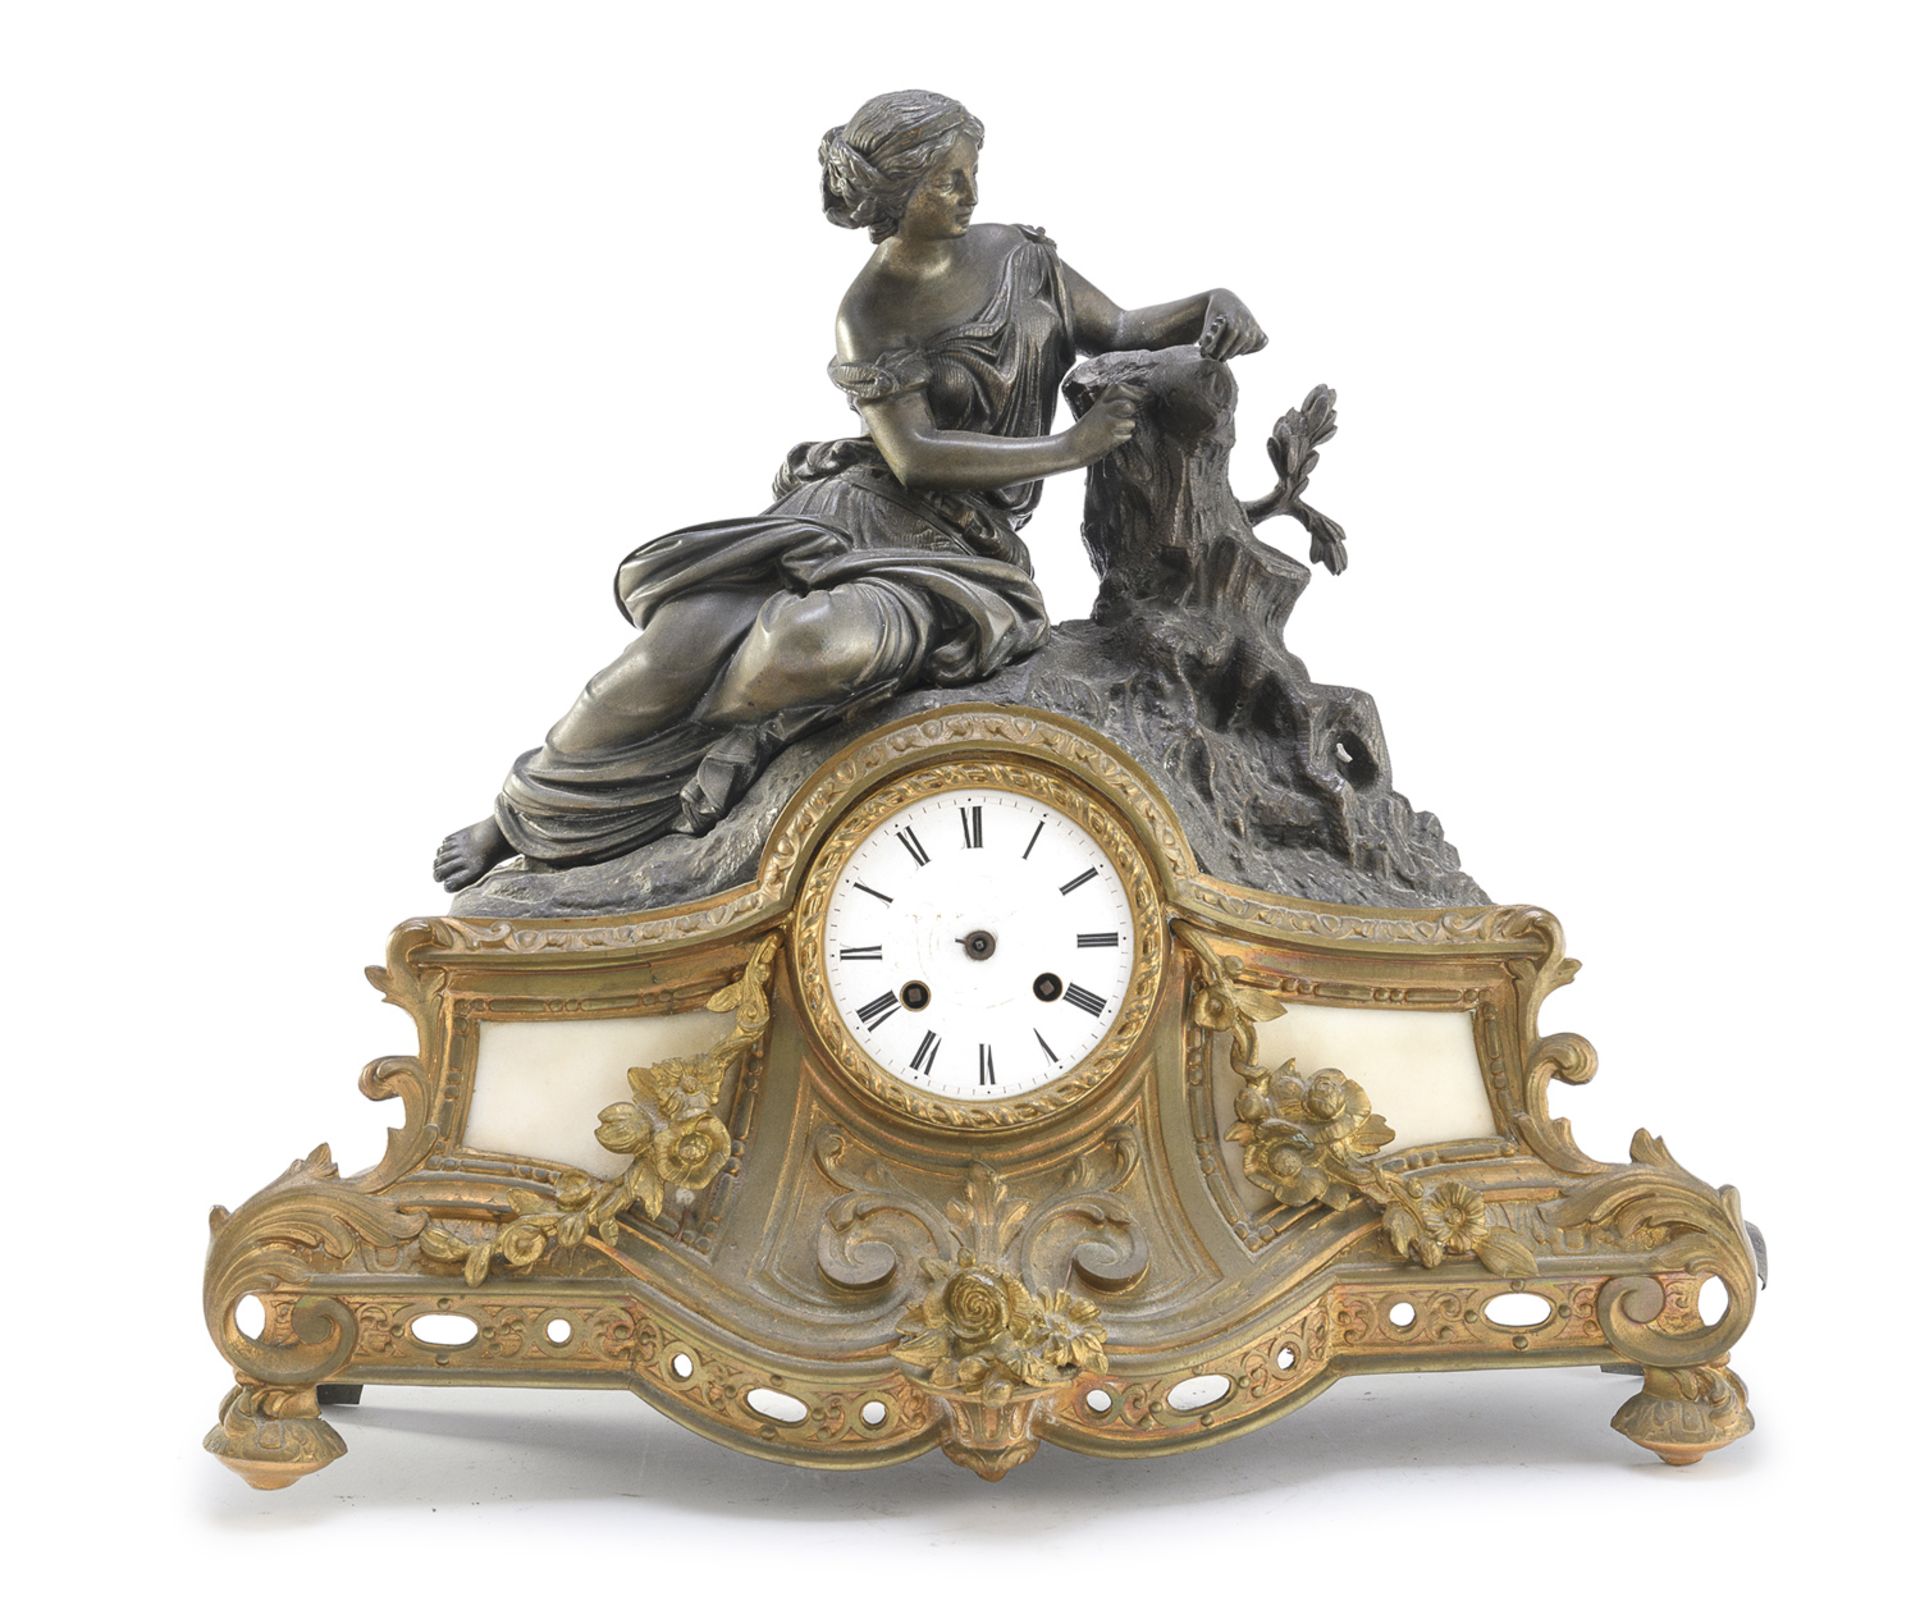 TABLE CLOCK IN GILDED AND BURNISHED METAL LATE 19th CENTURY